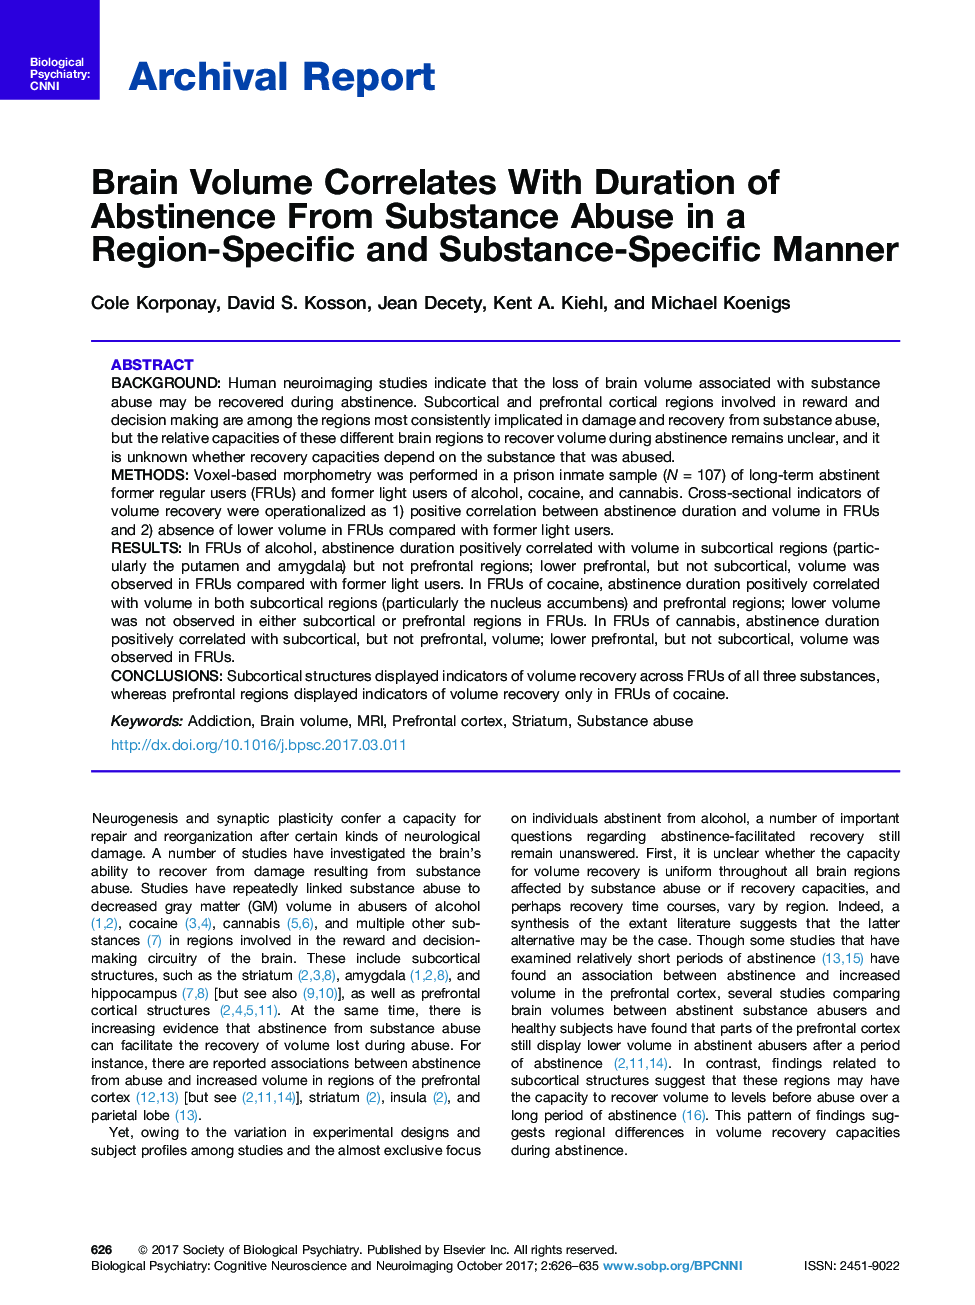 Archival ReportBrain Volume Correlates With Duration of Abstinence From Substance Abuse in a Region-Specific and Substance-Specific Manner